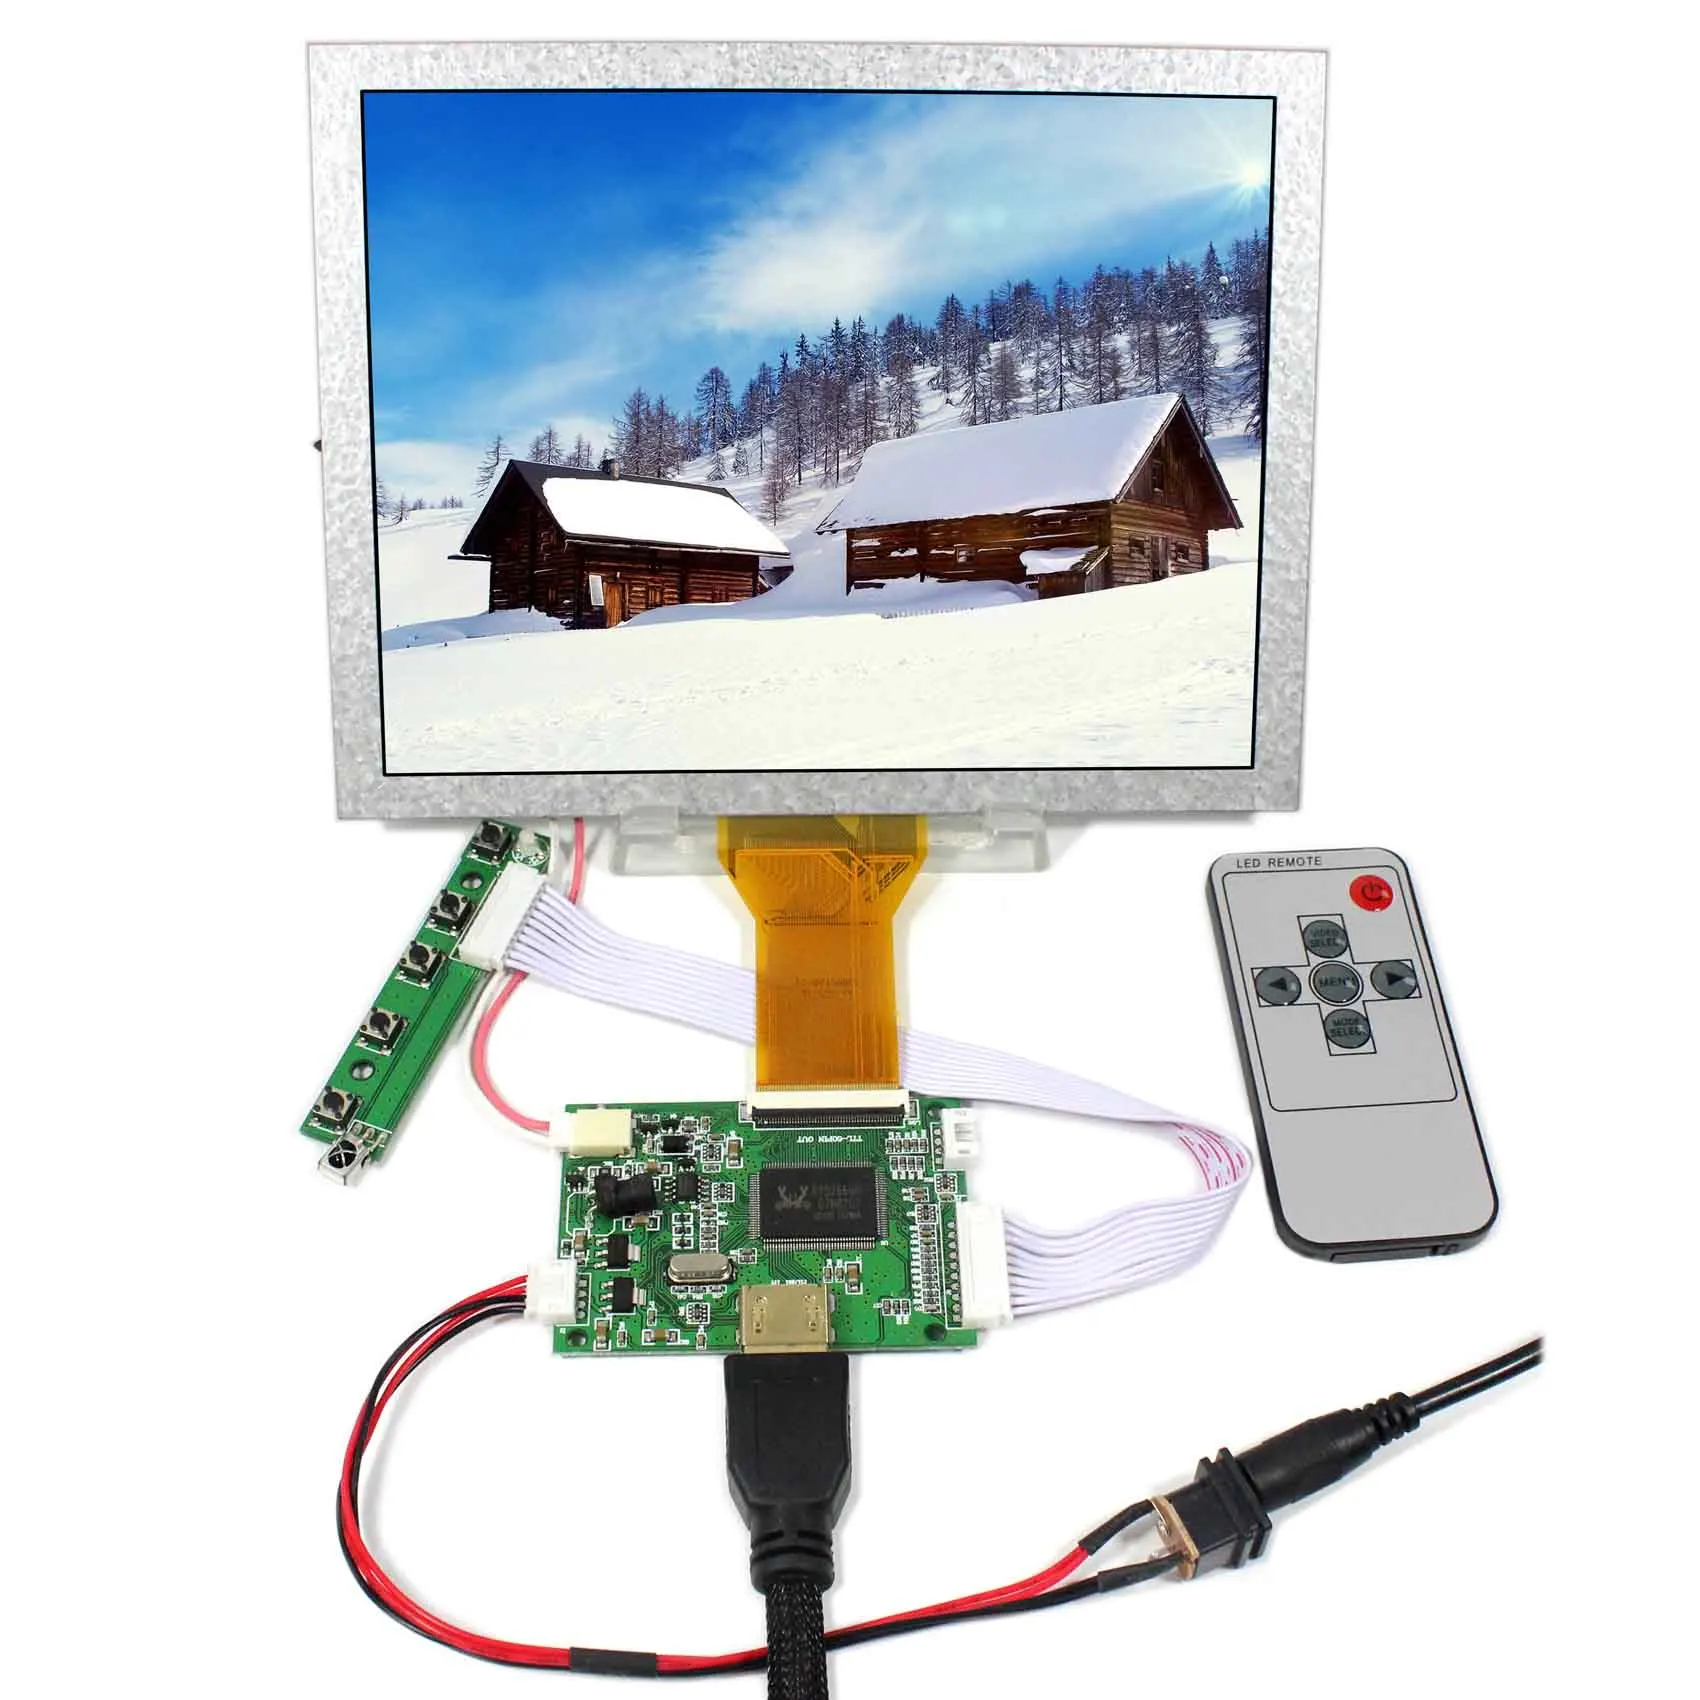 

HD-MI LCD Board 8" TTL EJ080NA-05A 800X600 LCD Screen Used in any embedded systems, GPS ,Industrial Device,Security Equipment